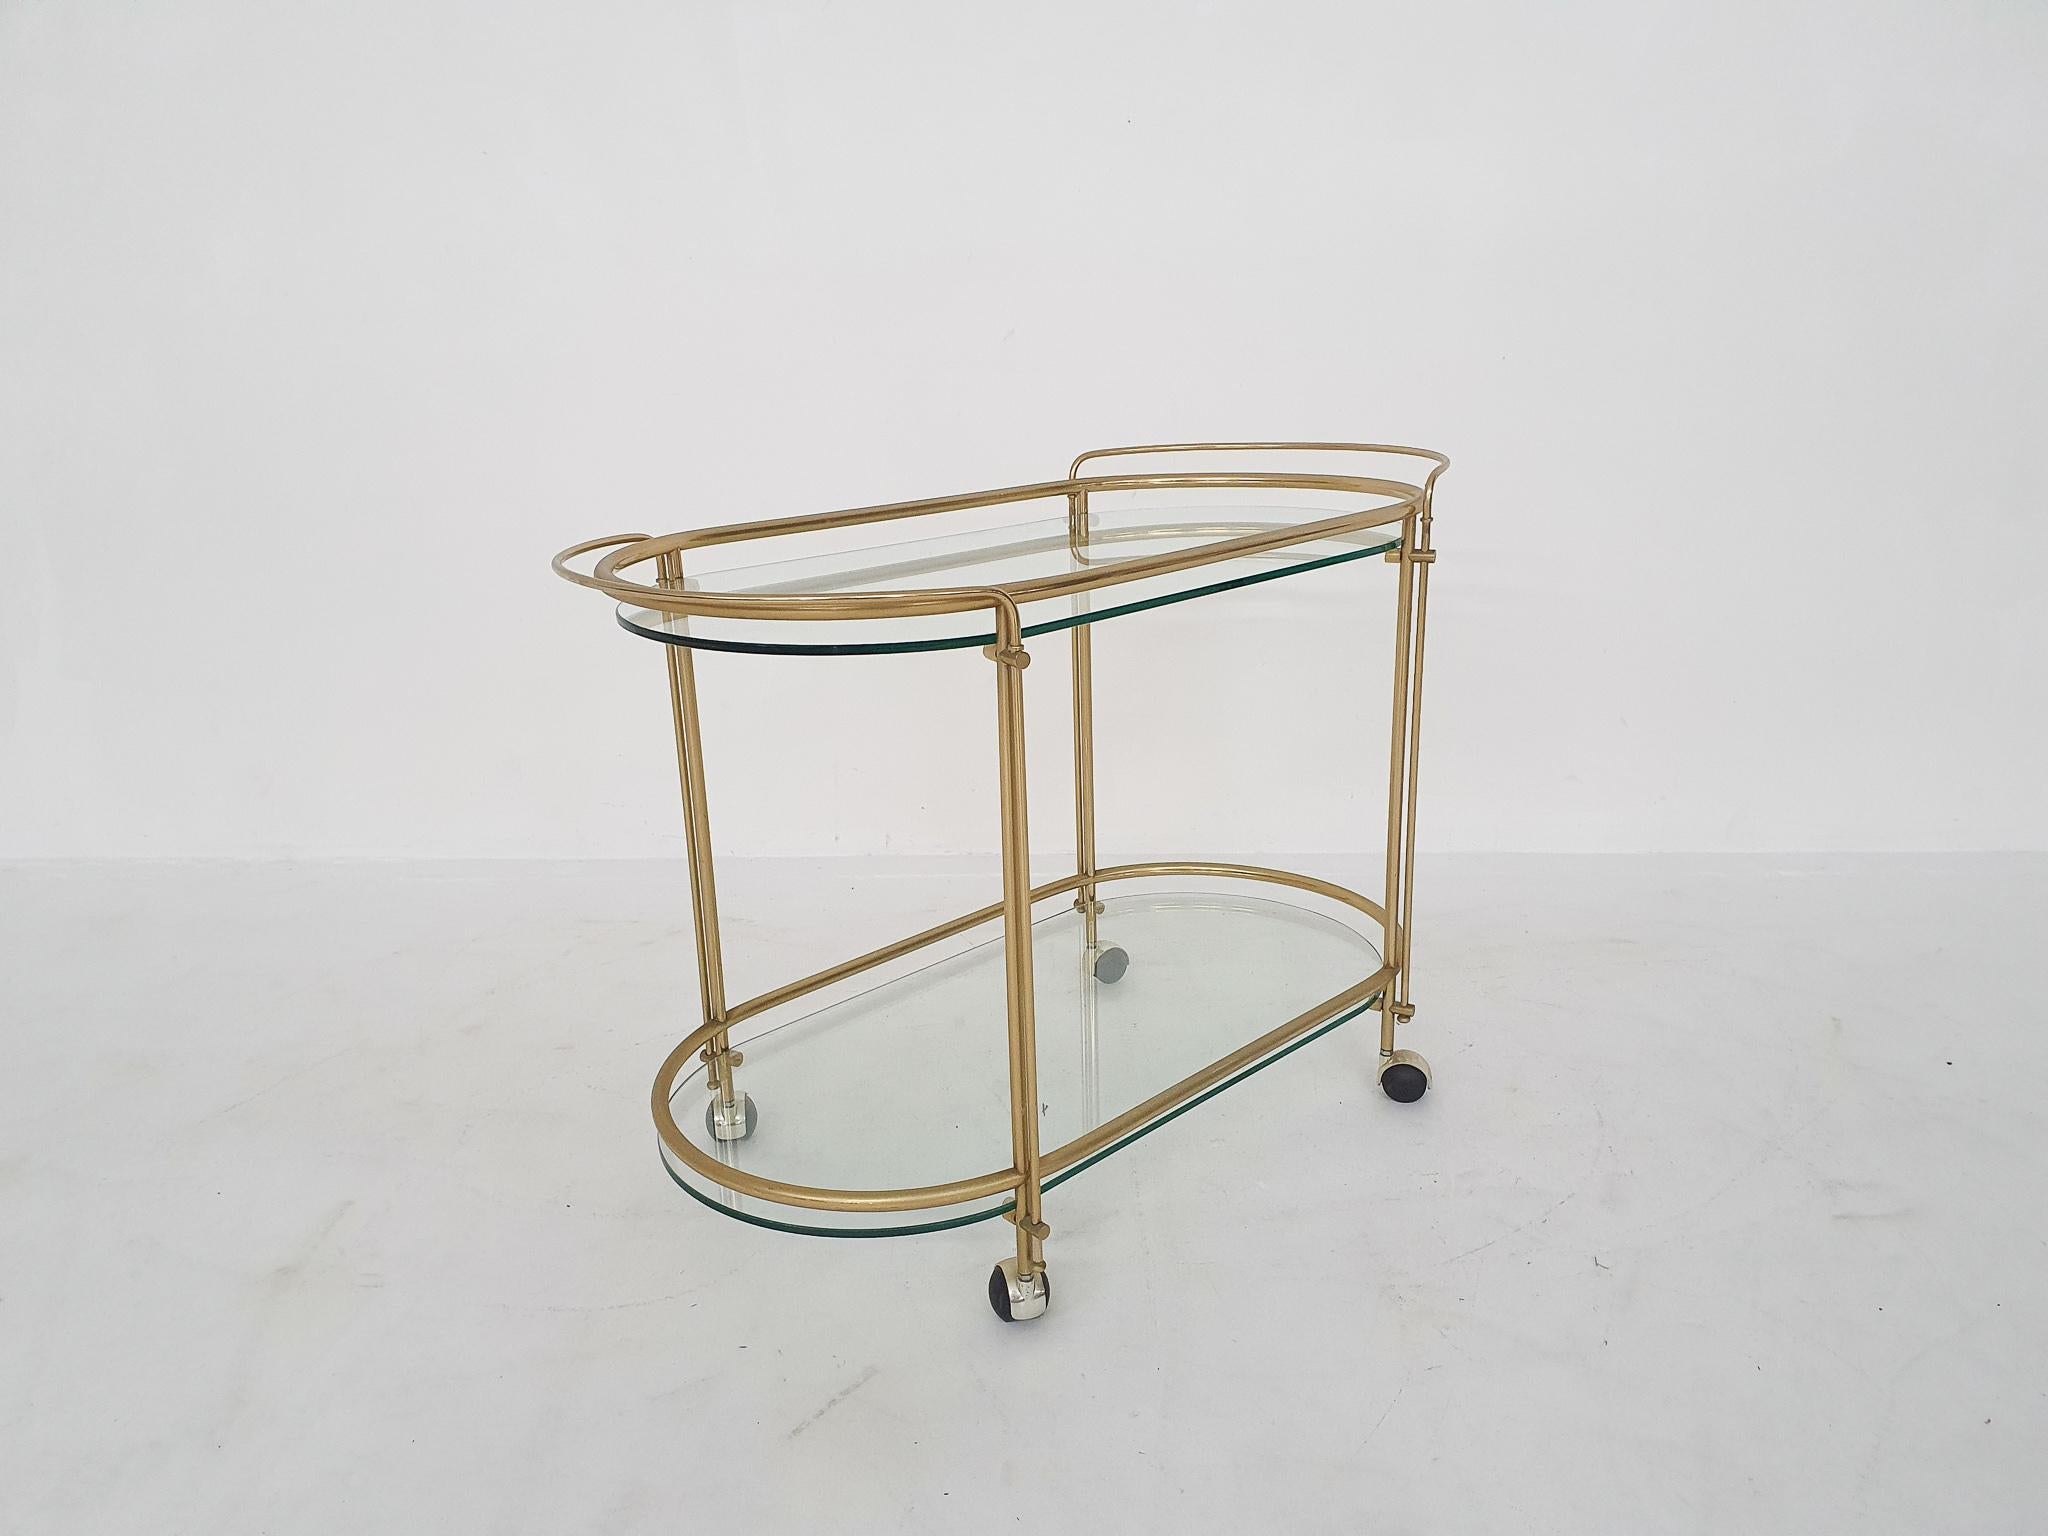 Italian Mid-Century Modern Glass and Gold Serving Trolley or Bar Cart, 1970's